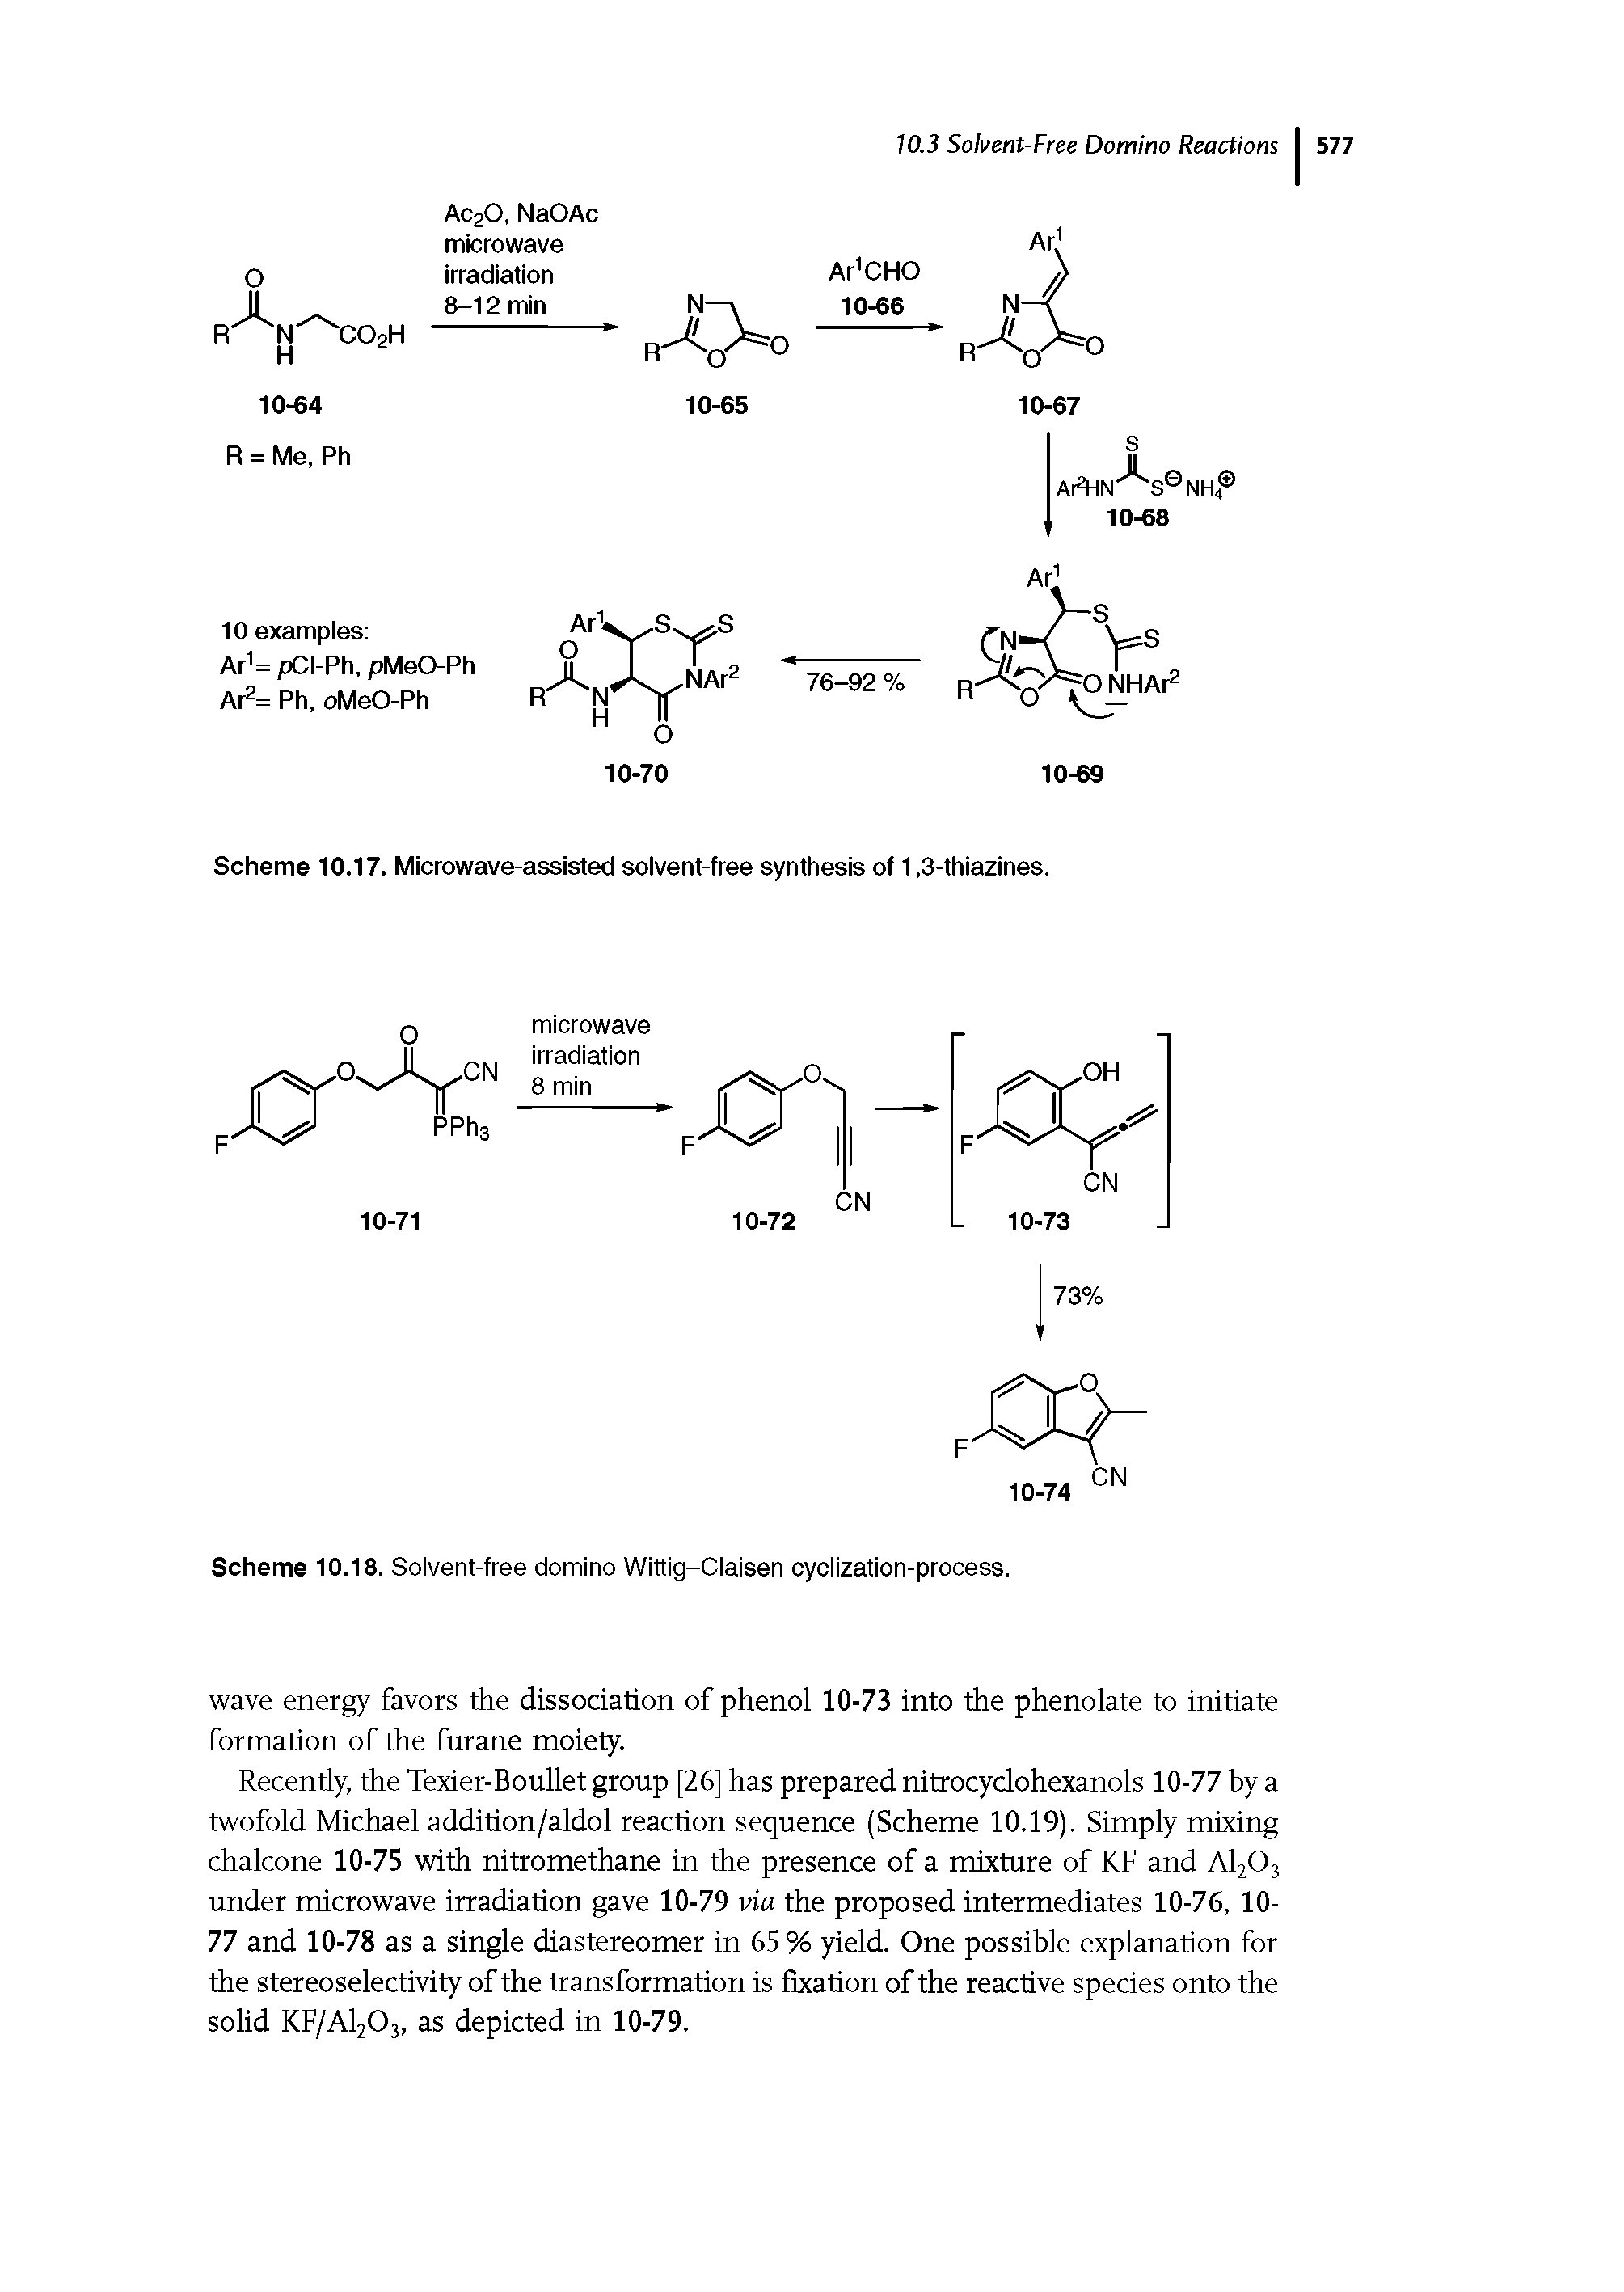 Scheme 10.17. Microwave-assisted solvent-free synthesis of 1,3-thiazines.